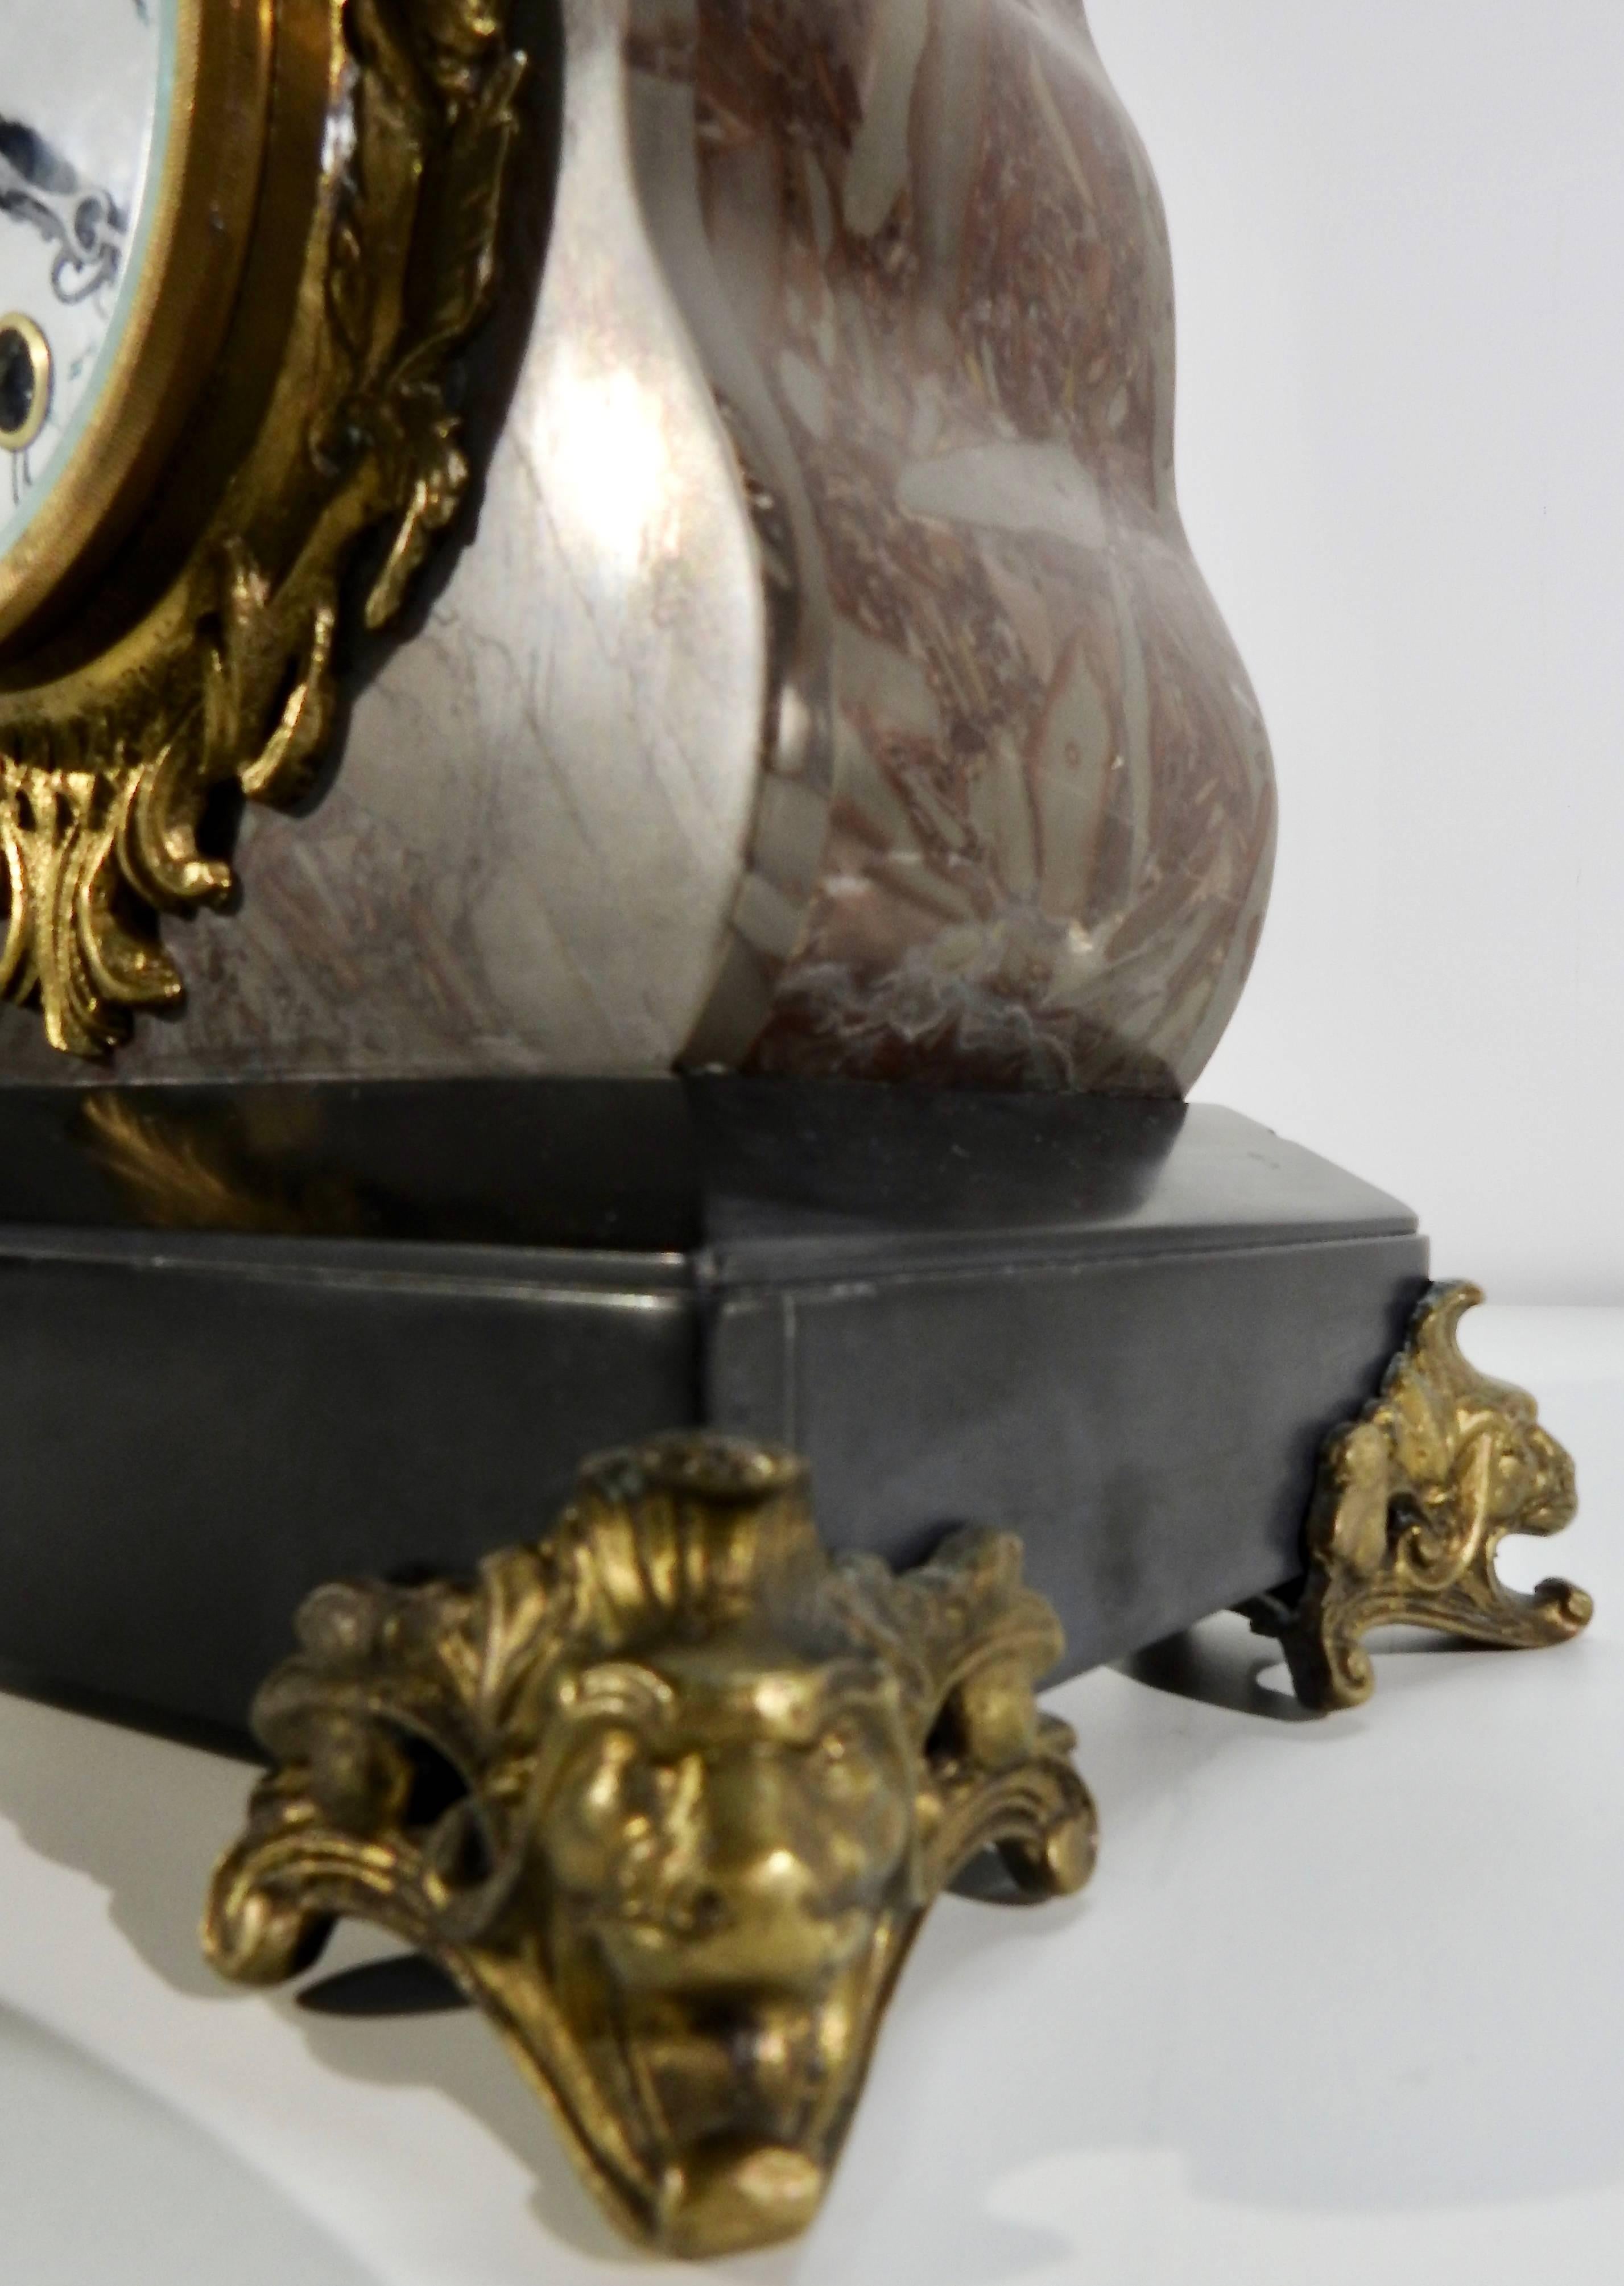 A stunning bronze cherub sits at the place of honor at the top of this French mantel clock. The body of the clock is made of marble with veins of gray and burgundy. It is completed with Classic black slate. There is beautiful bronze metal work